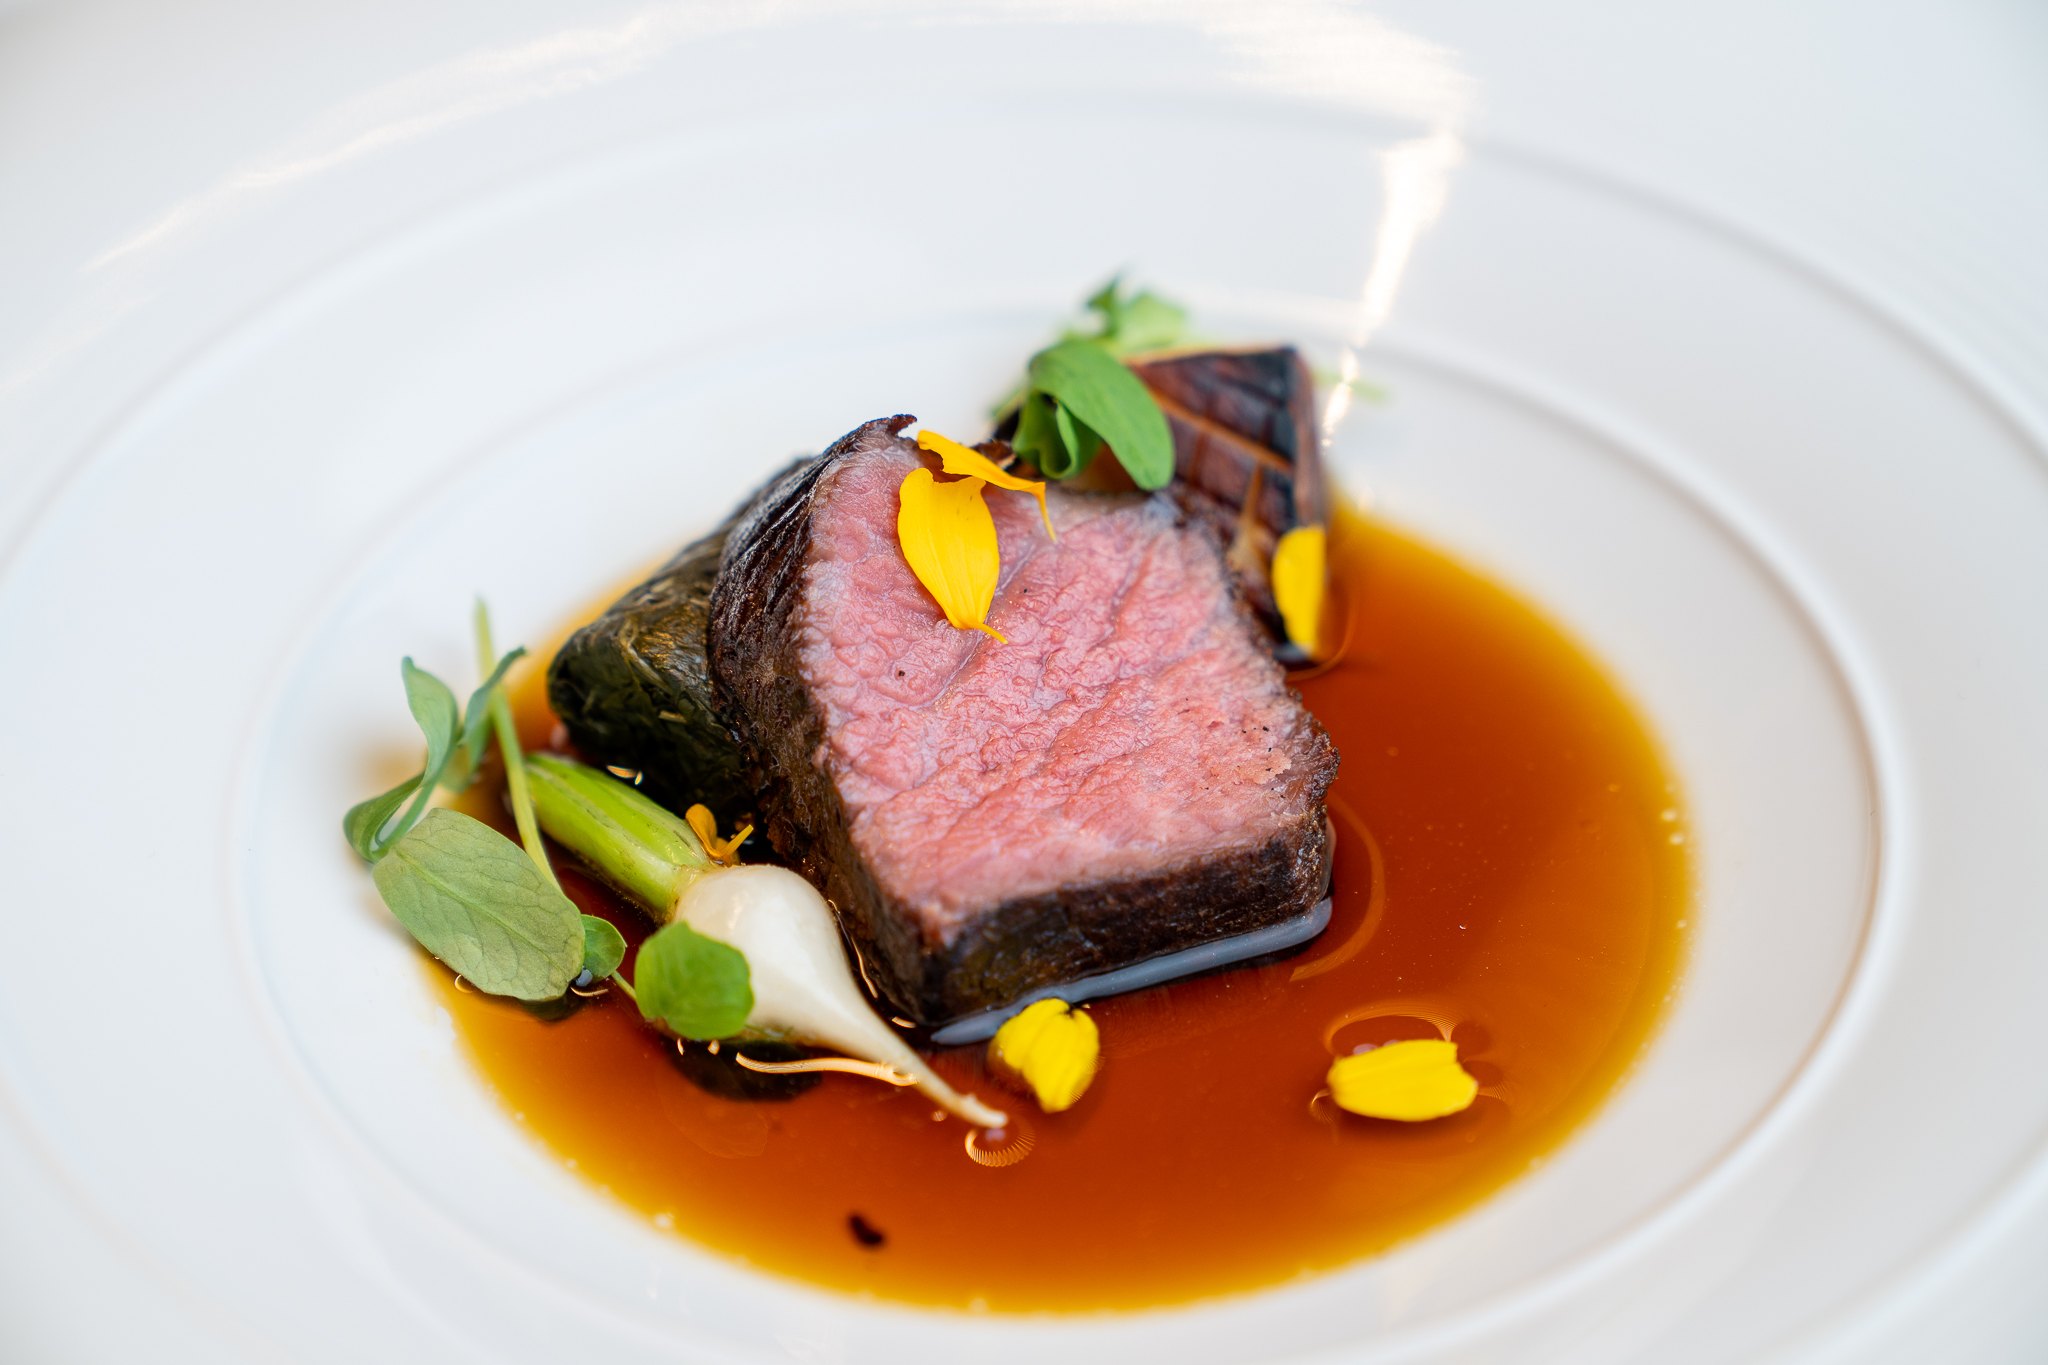 The best fine dining restaurants in the San Francisco Bay Area